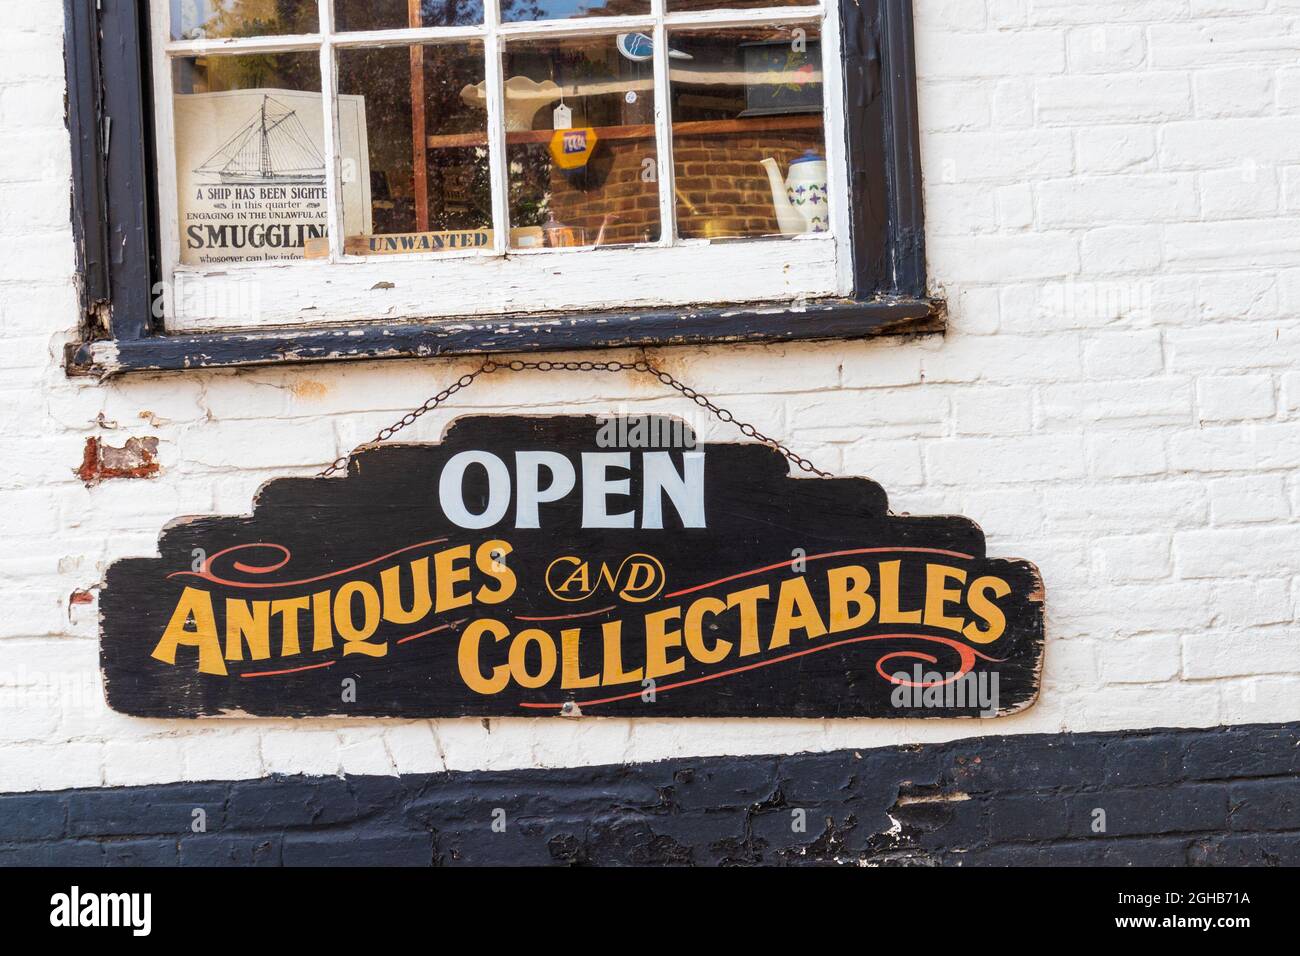 Open Antiques and collectibles sign, Roggen, East sussex, uk Stockfoto